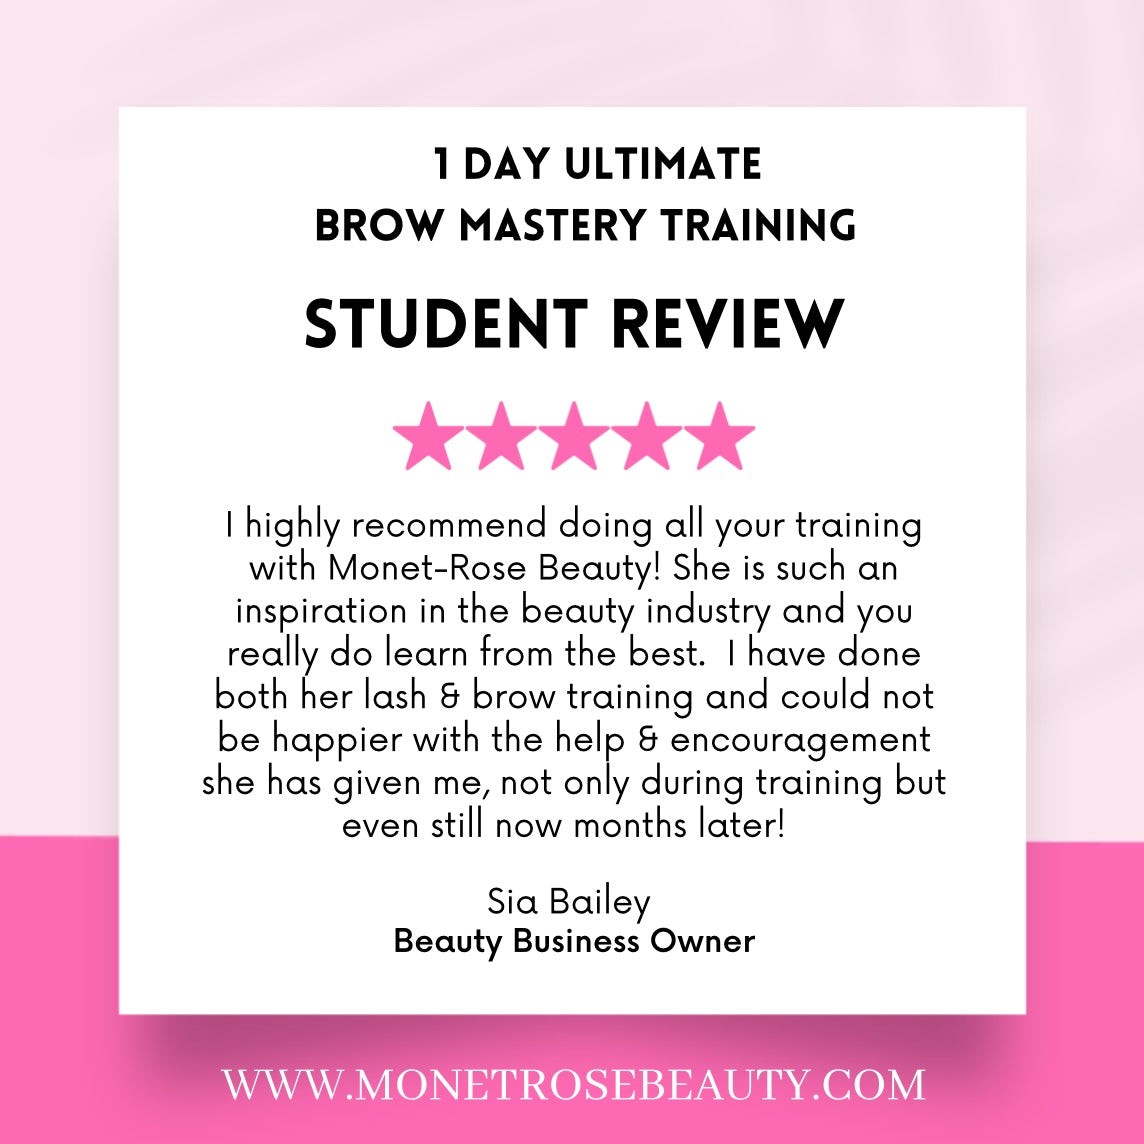 1 Day Ultimate Brow Mastery Training